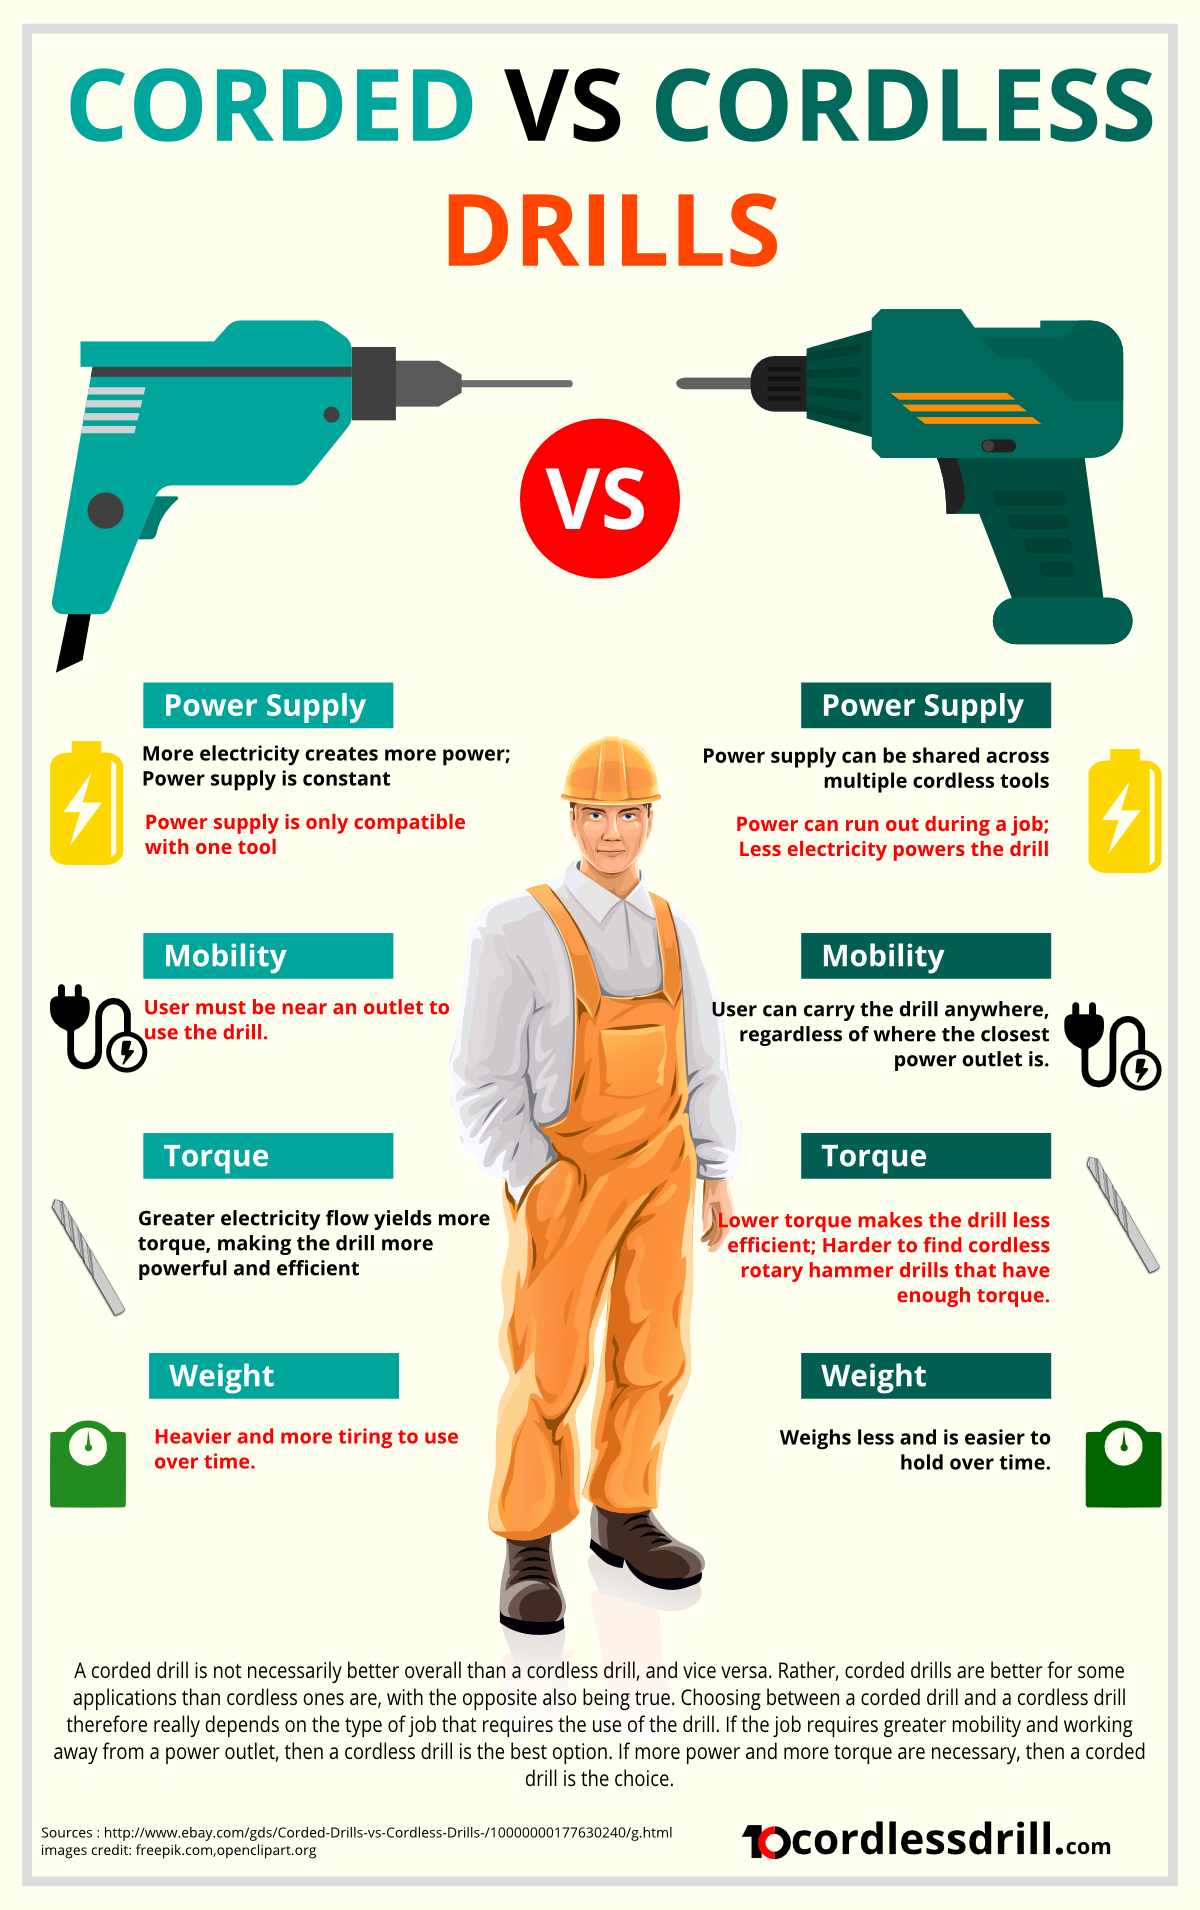 Comparing Corded v/s Cordless Power Tools - Pros and Cons.